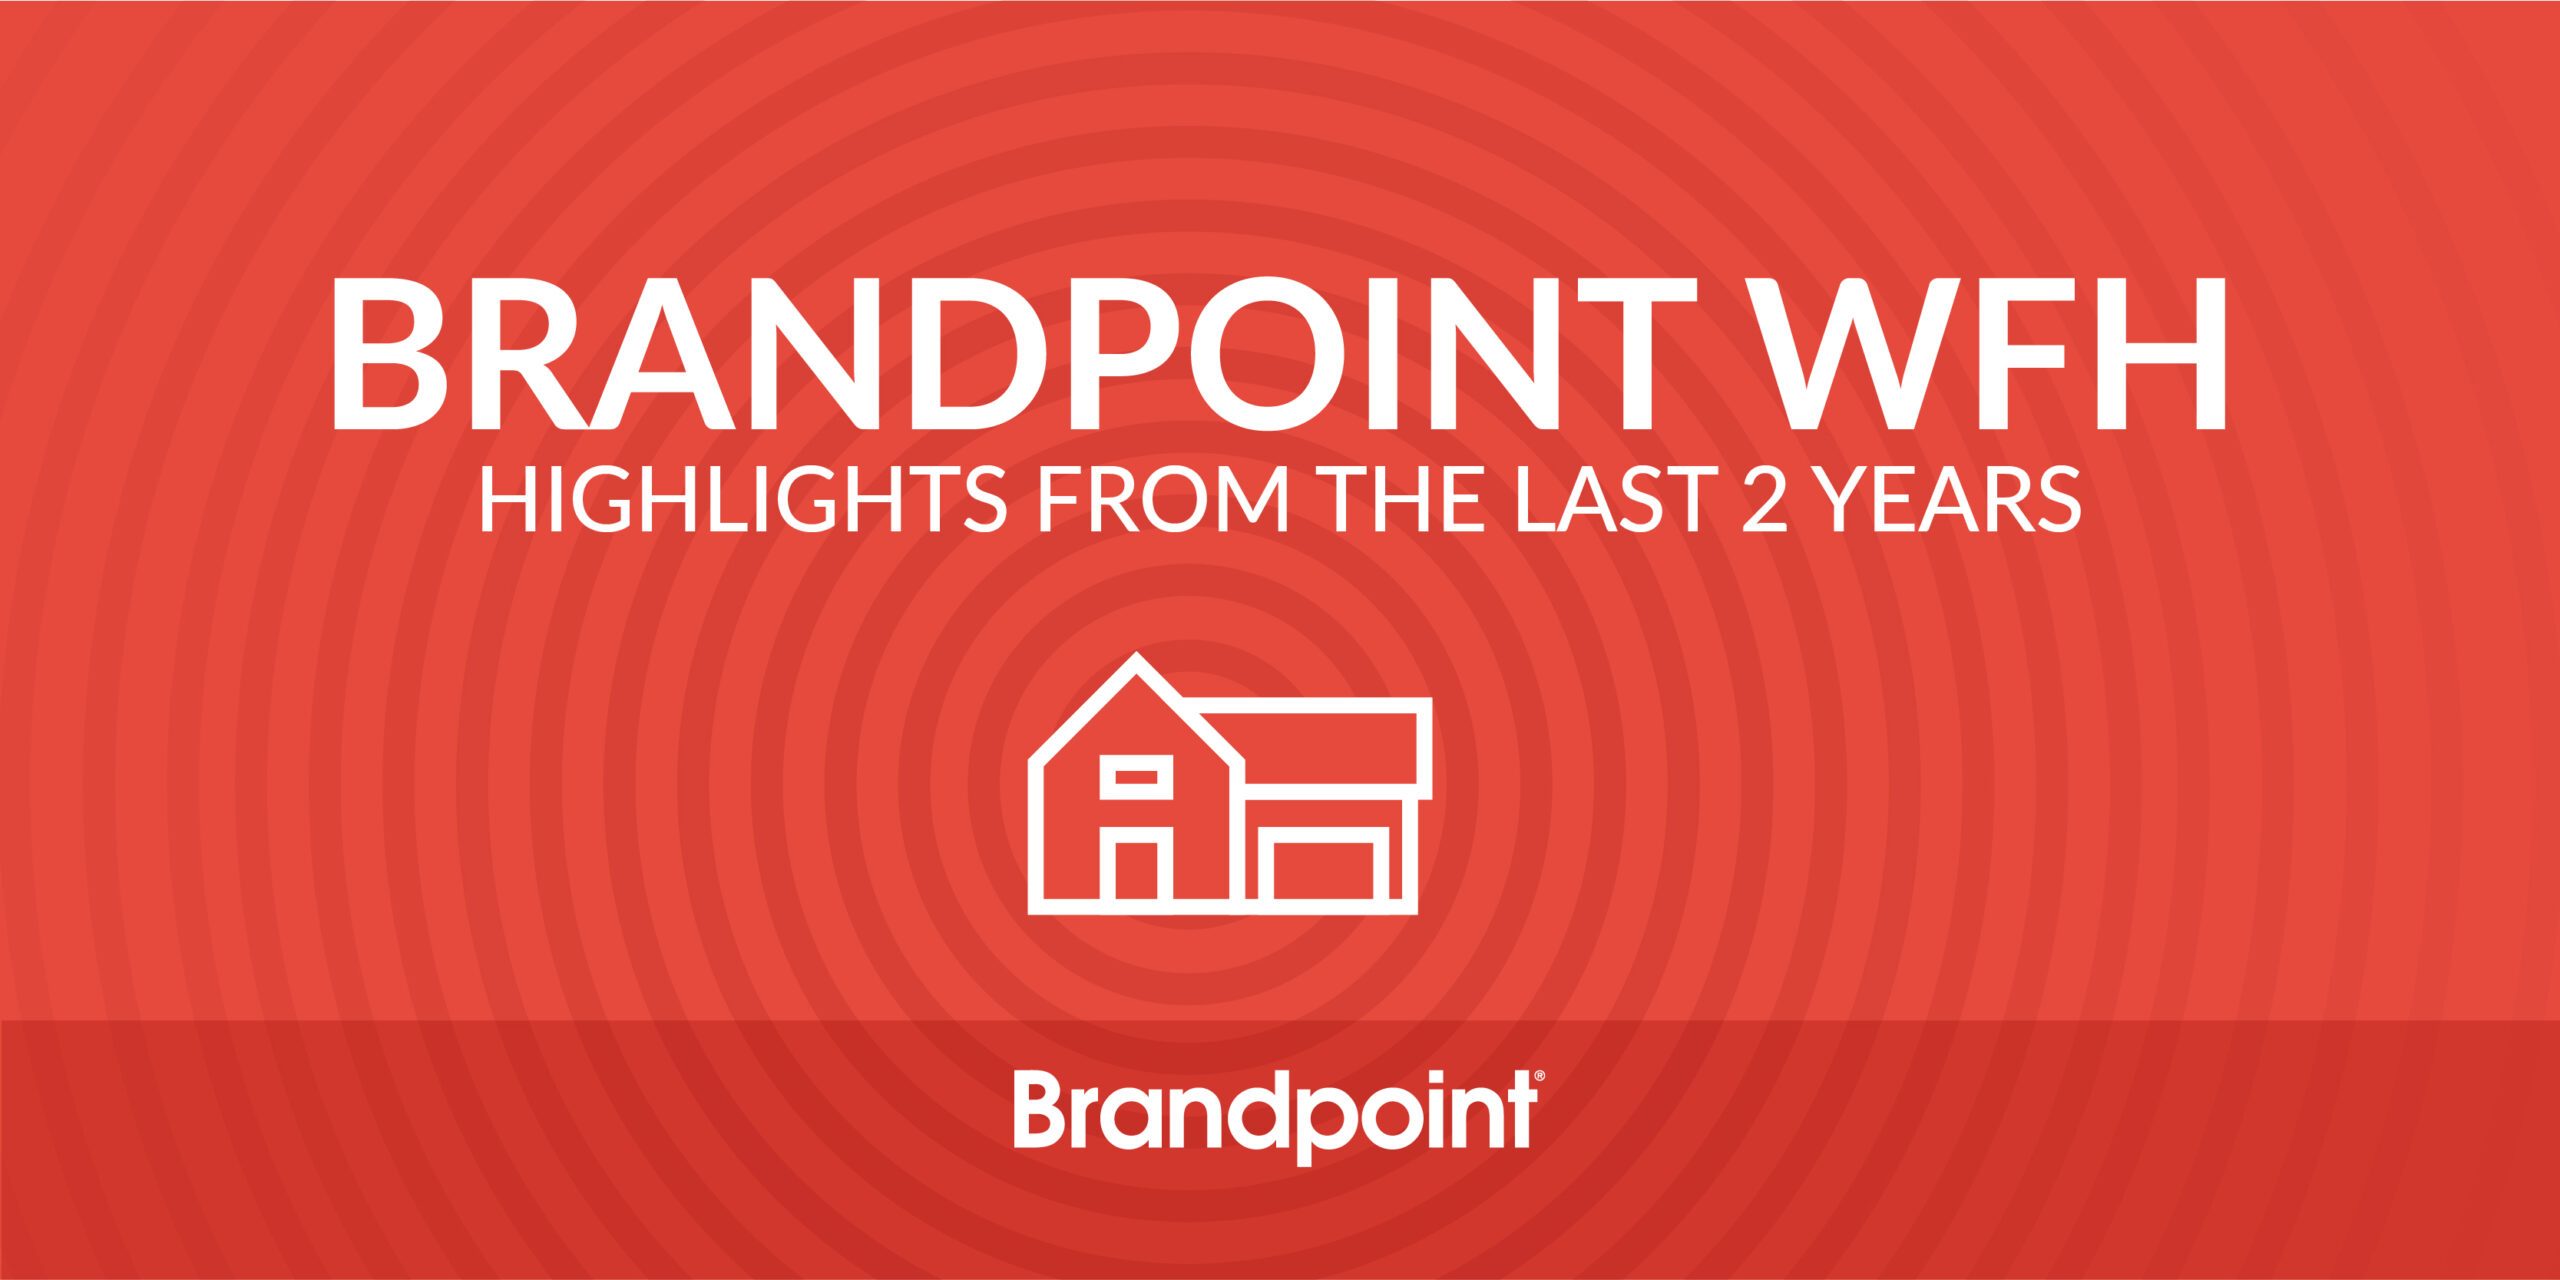 BPT-Blog-Brandpoint WFH Highlights From The Last 2 Years-01 (1)